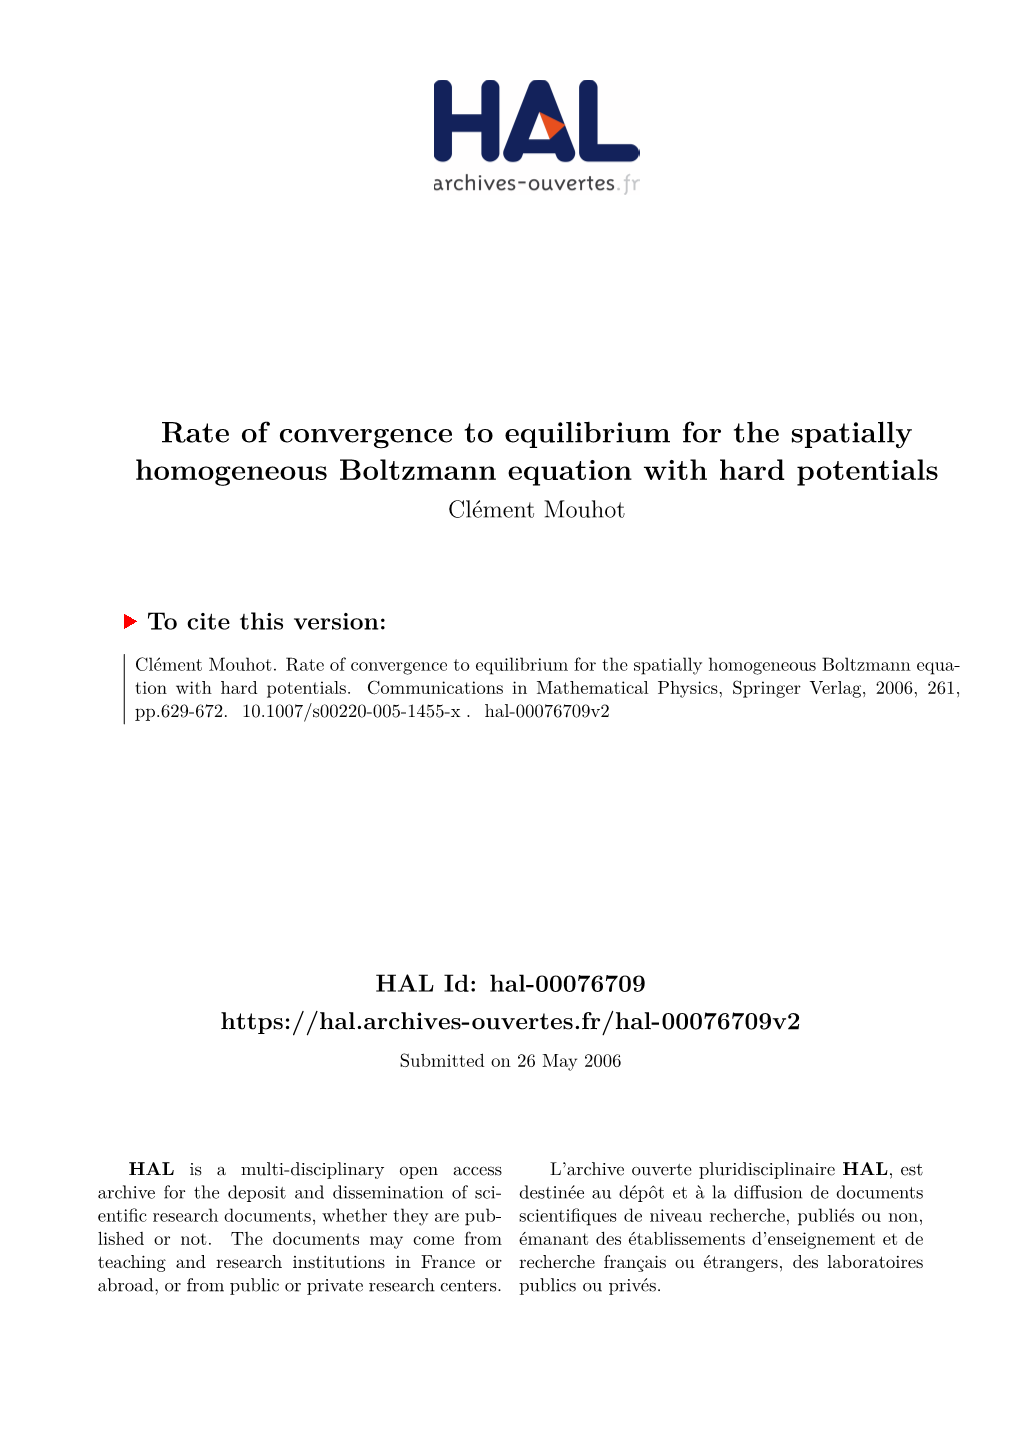 Rate of Convergence to Equilibrium for the Spatially Homogeneous Boltzmann Equation with Hard Potentials Clément Mouhot